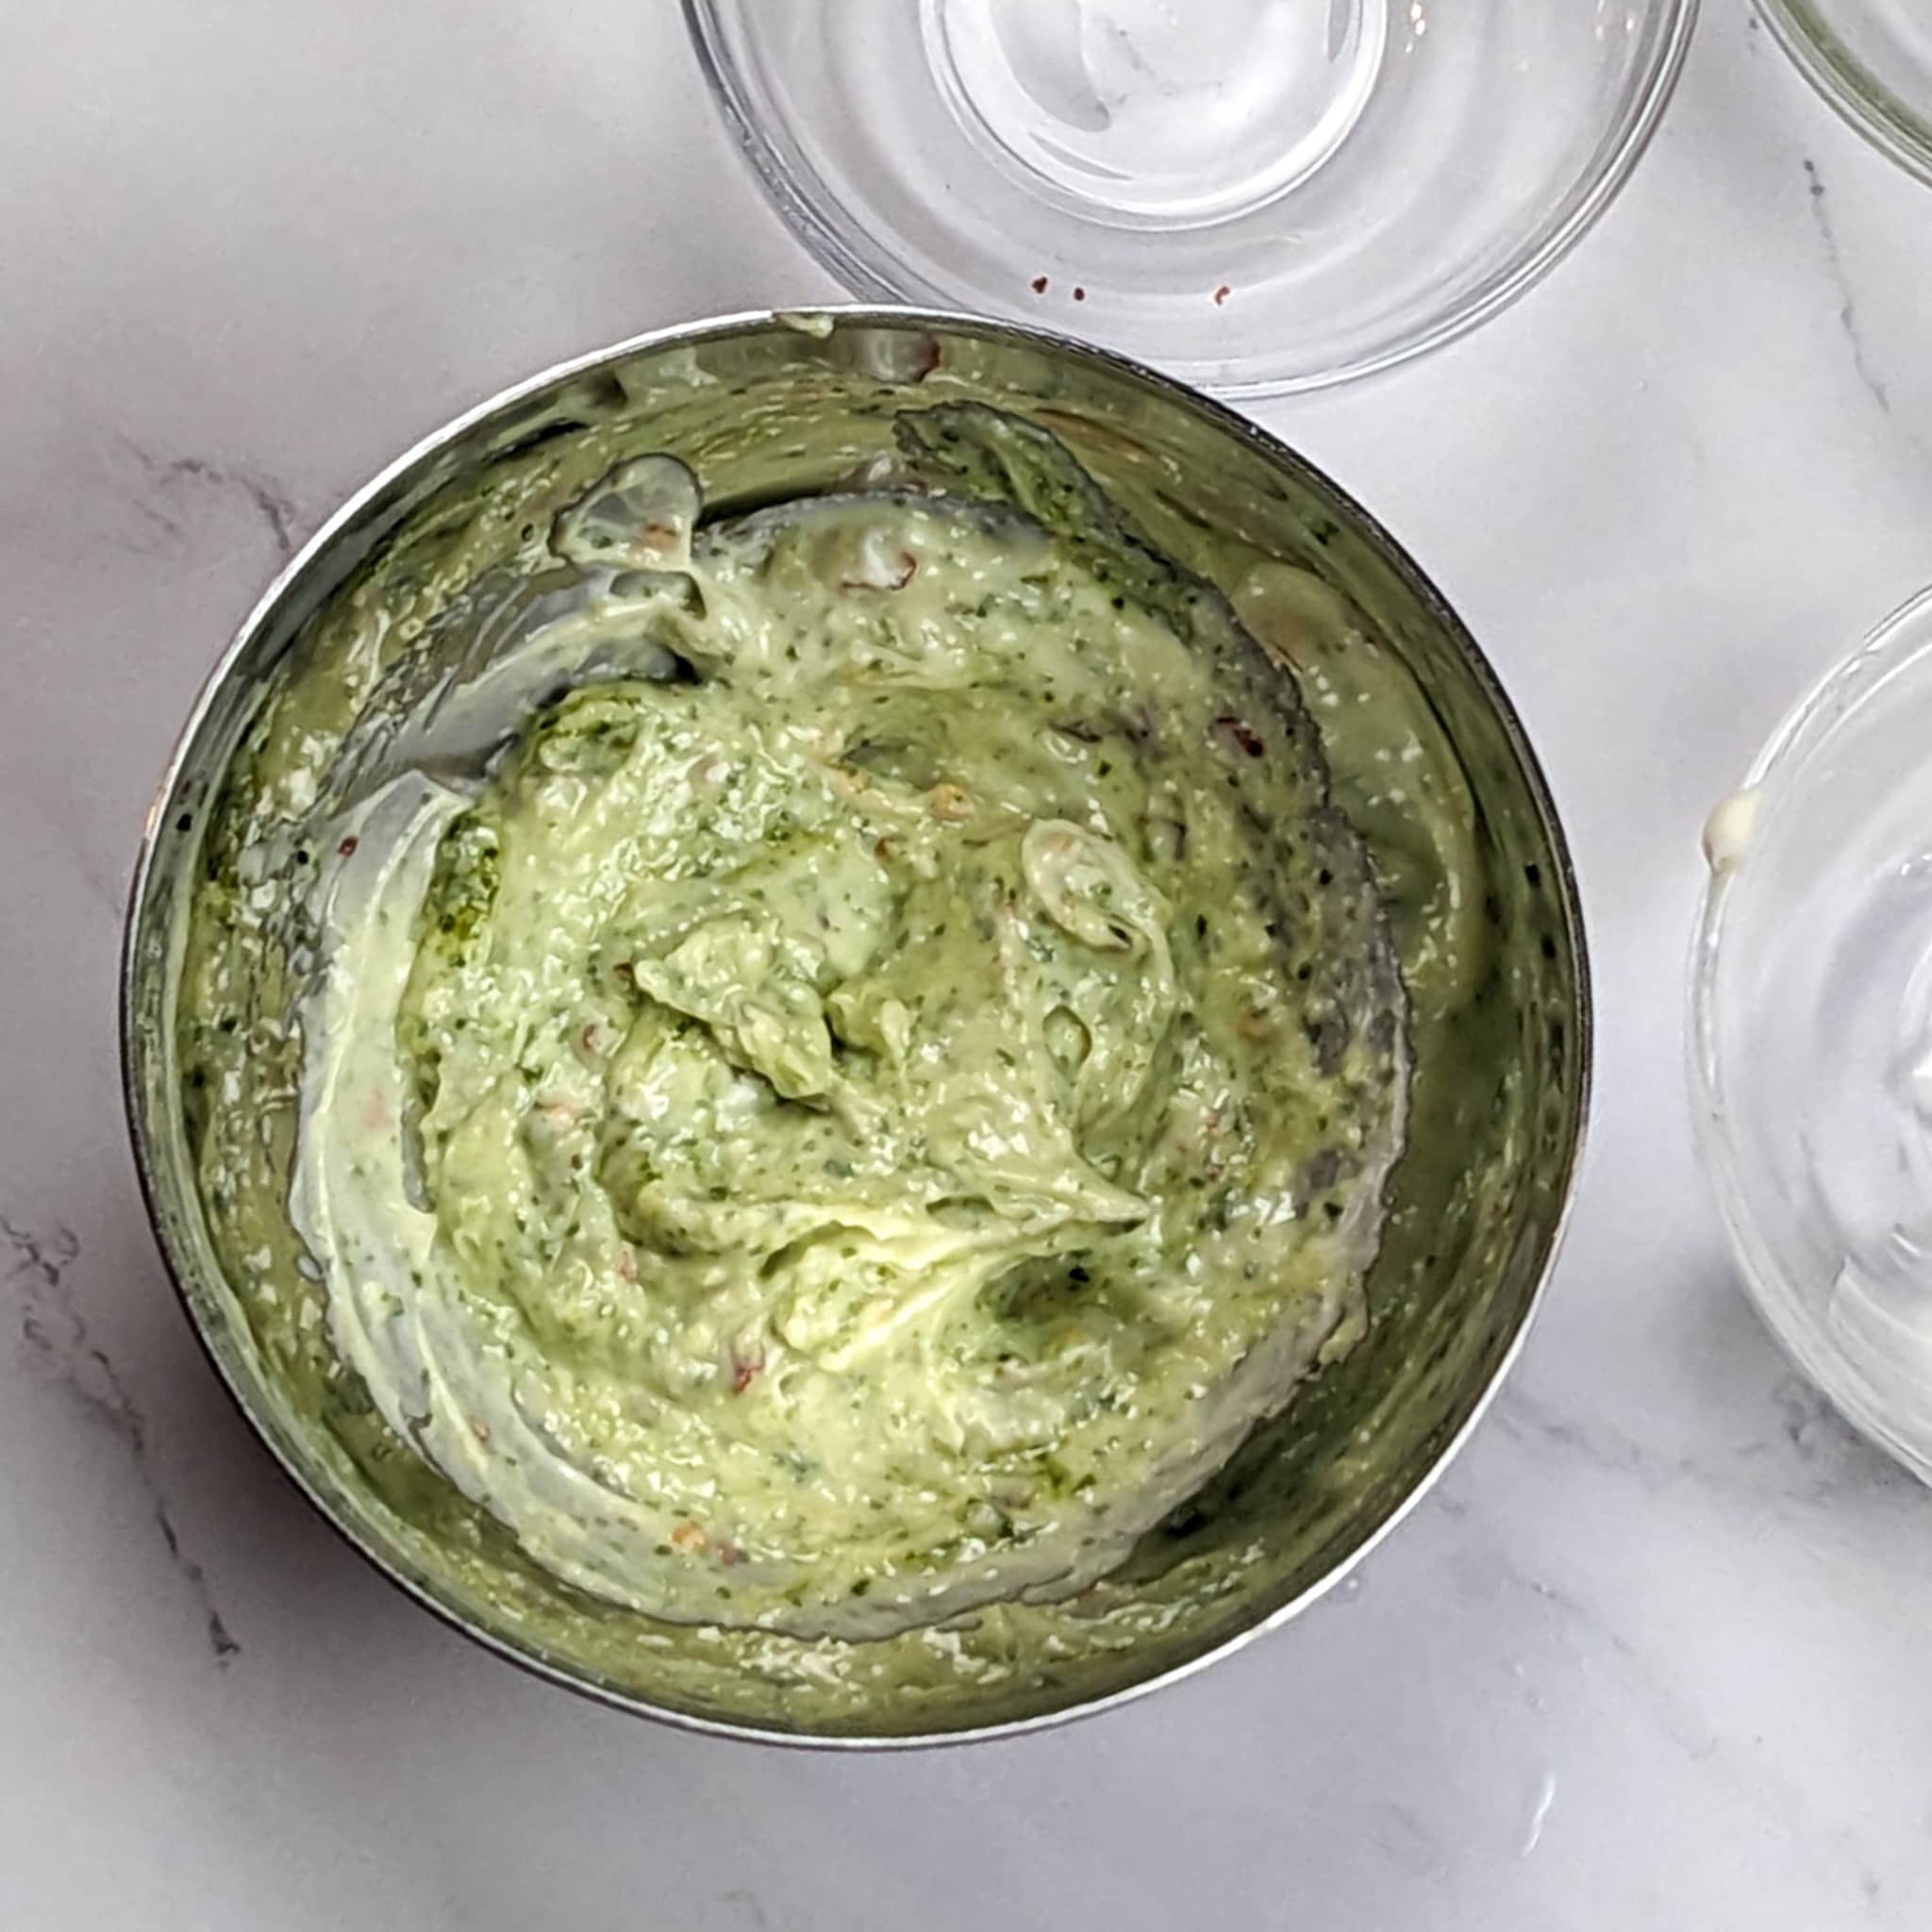 spicy basil pesto mayo in a bowl on a marble counter